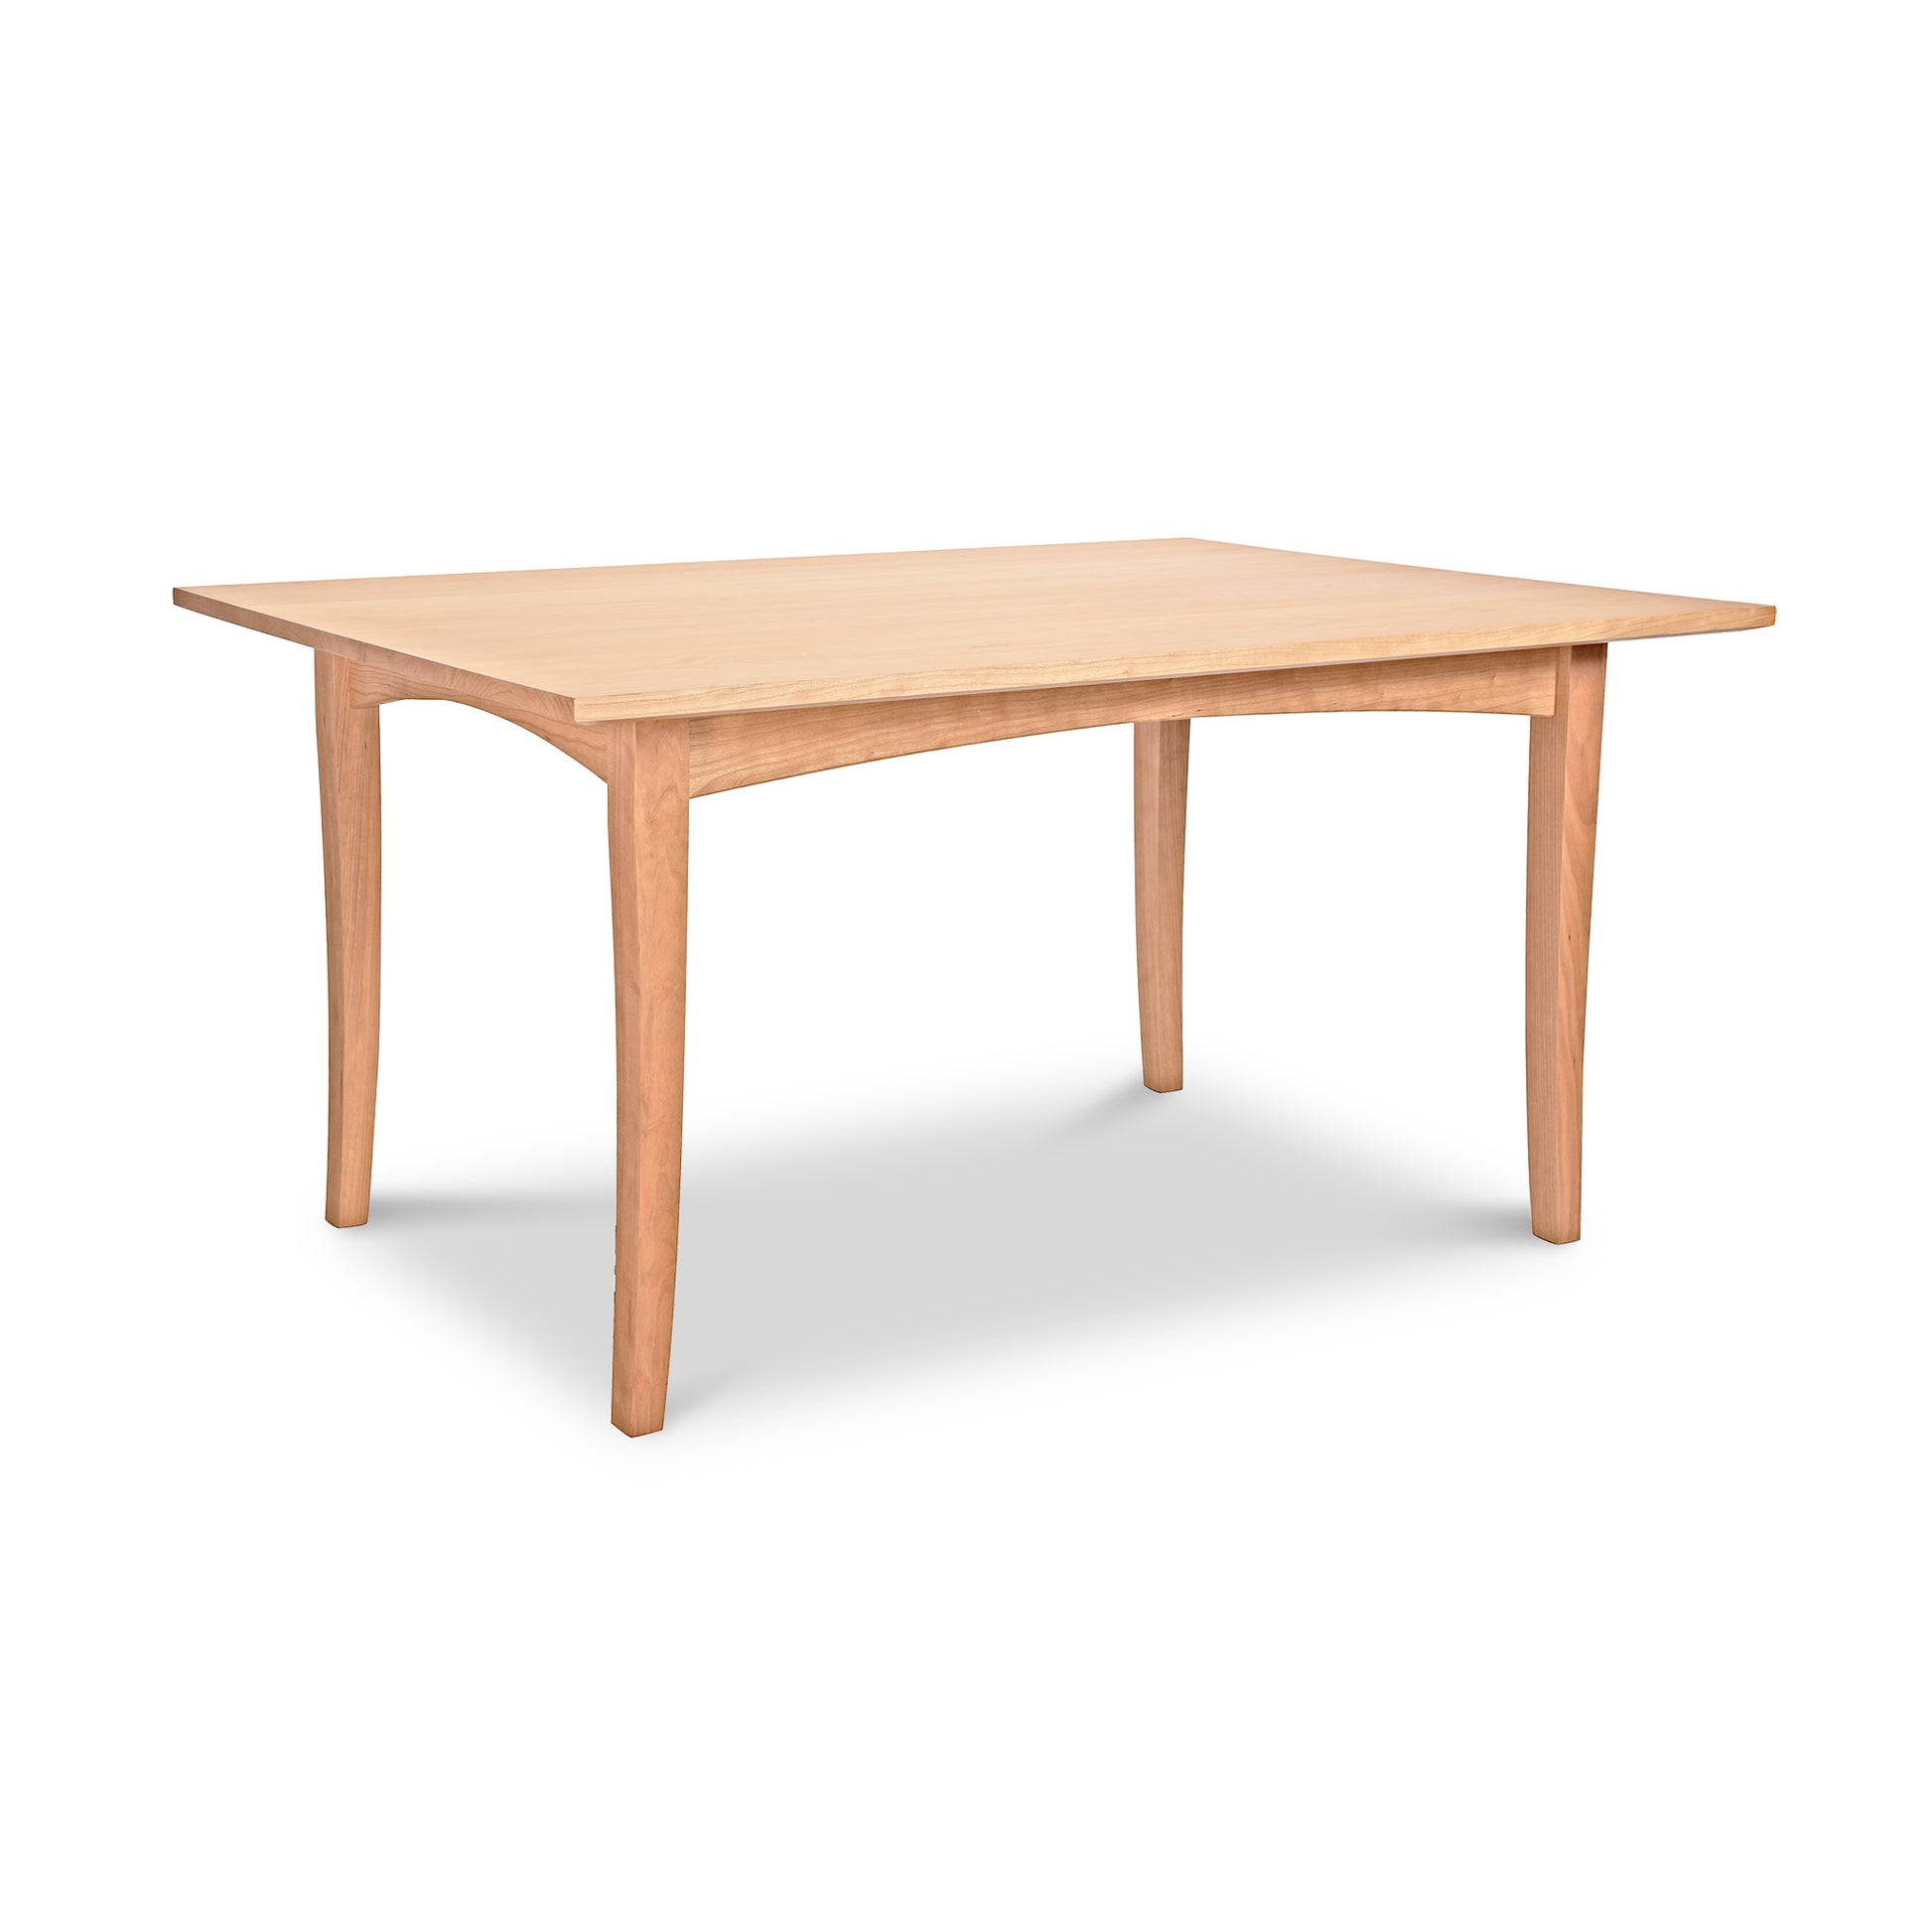 A Maple Corner Woodworks American Shaker Rectangular Solid Top Table, made of natural American hardwood, showcased on a white background.